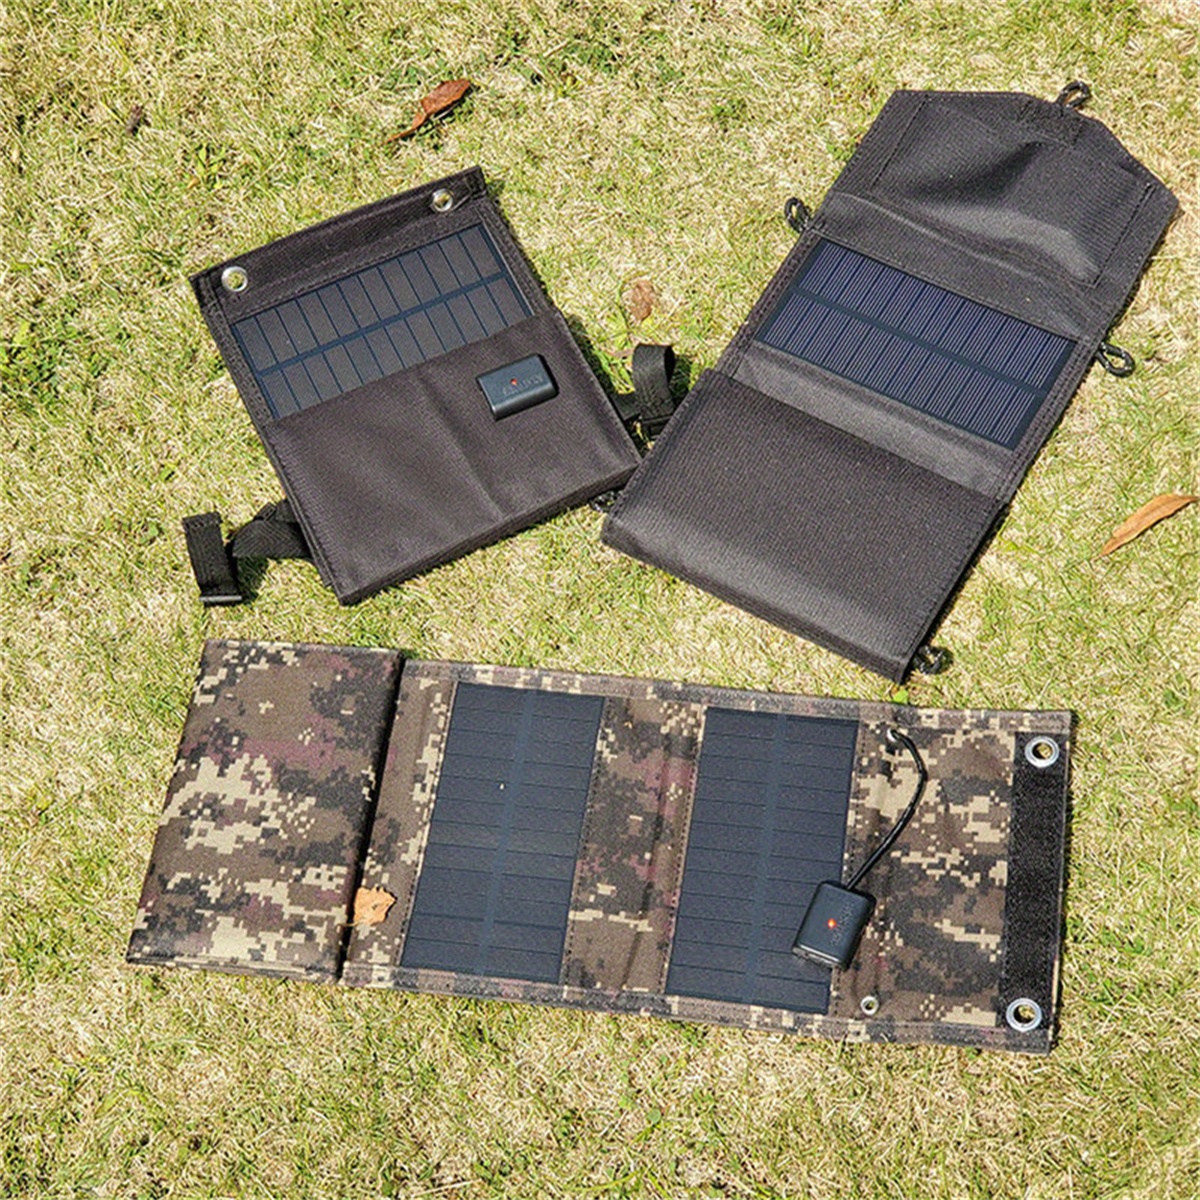 1pc waterproof solar panels portable foldable dual 5v usb solar panel charger power bank for phone battery details 2